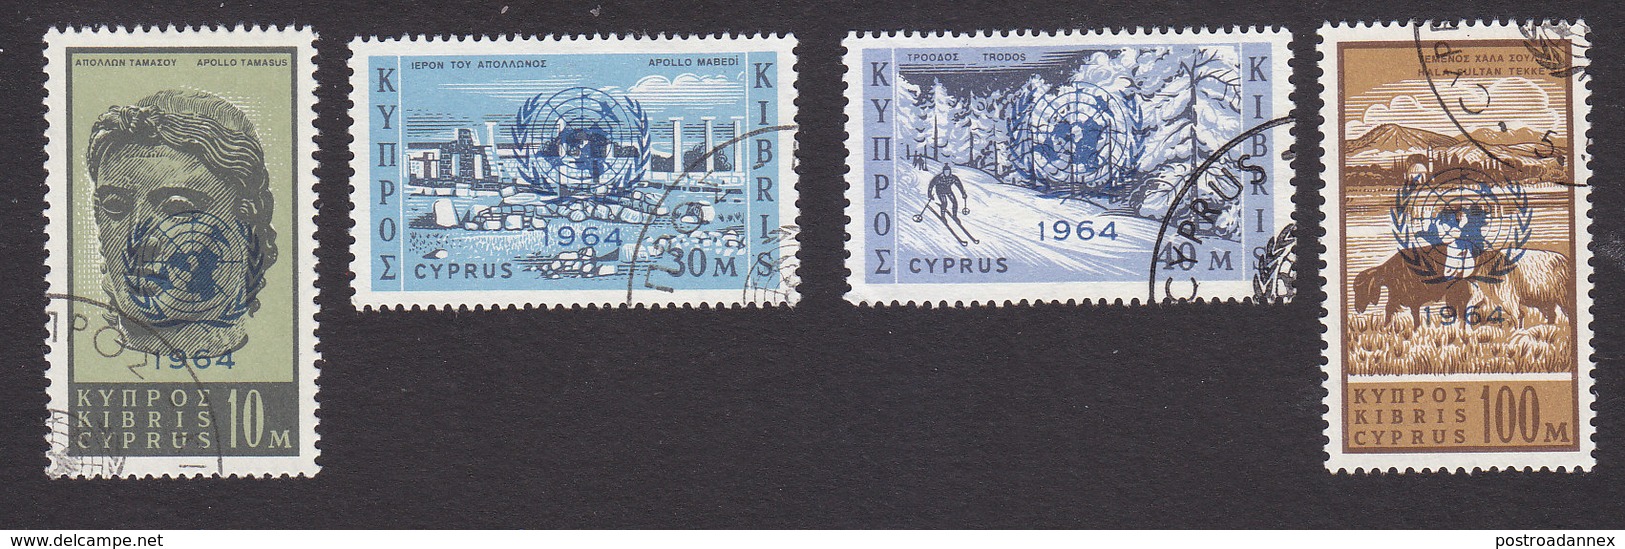 Cyprus, Scott #232-234, 236, Used, Stamps Of Cyprus With UN Overprint, Issued 1964 - Used Stamps